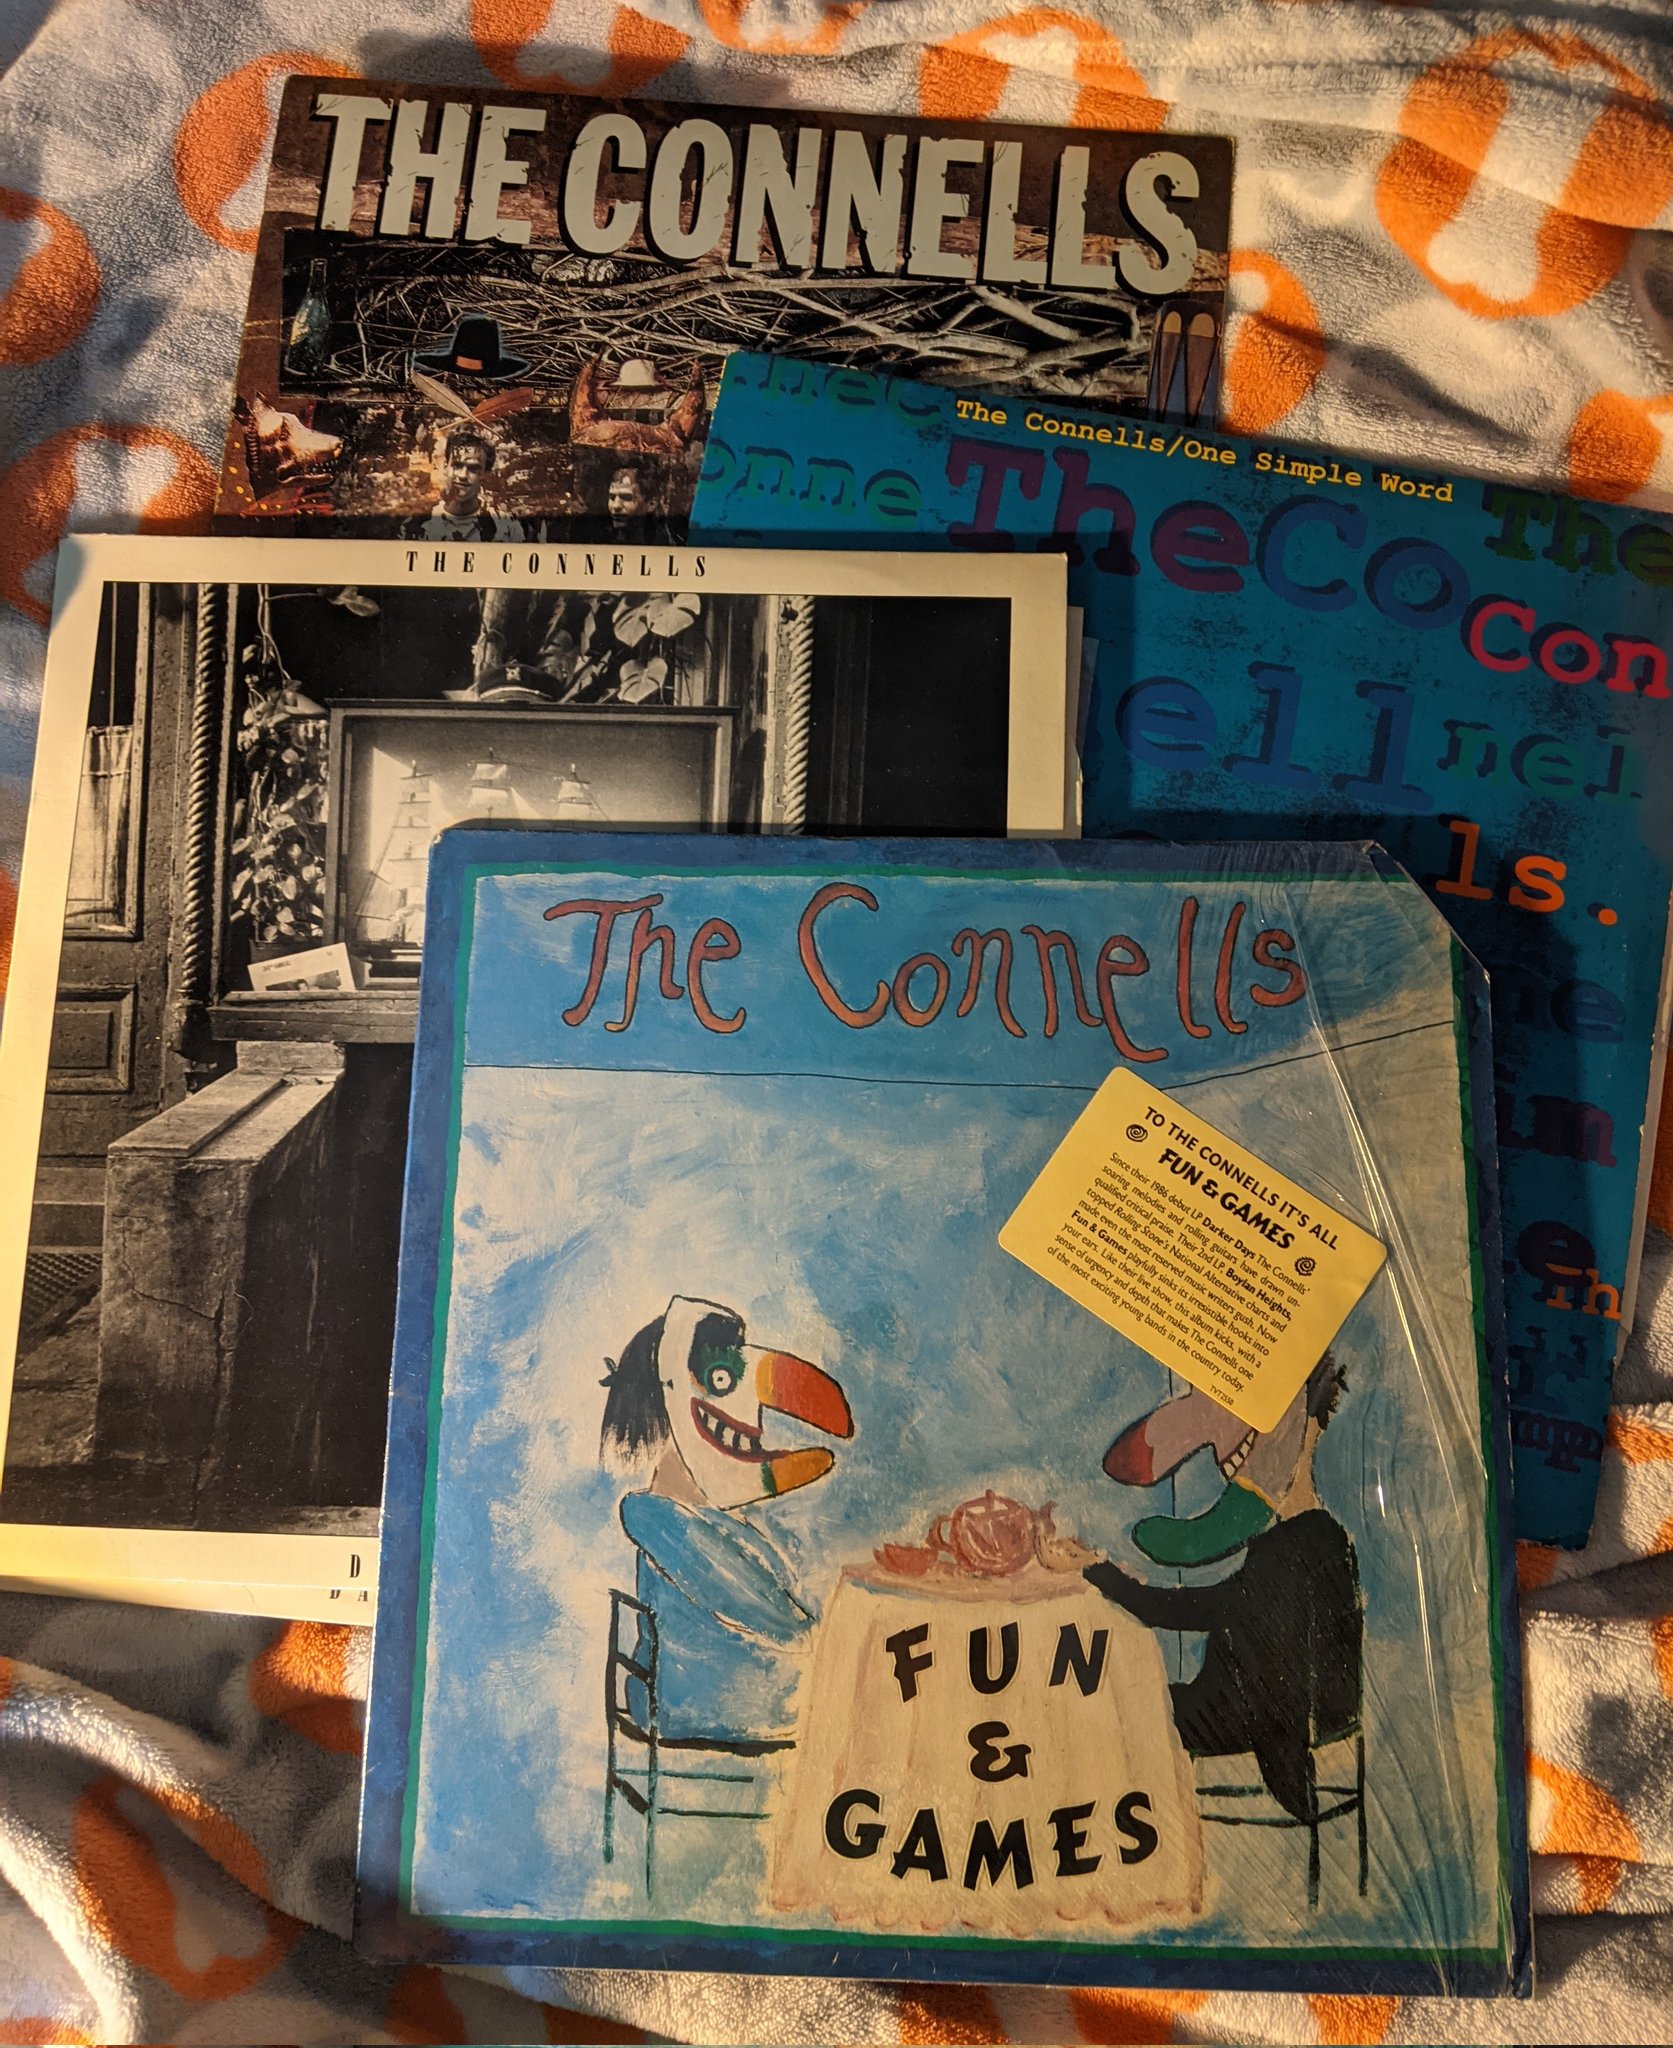 Mars udmelding Vidner The Connells on Twitter: "The last widely distributed Connells album on  vinyl was 1990's One Simple Word. Surprisingly Ring, our best selling  album, was only released on vinyl in Greece and reportedly